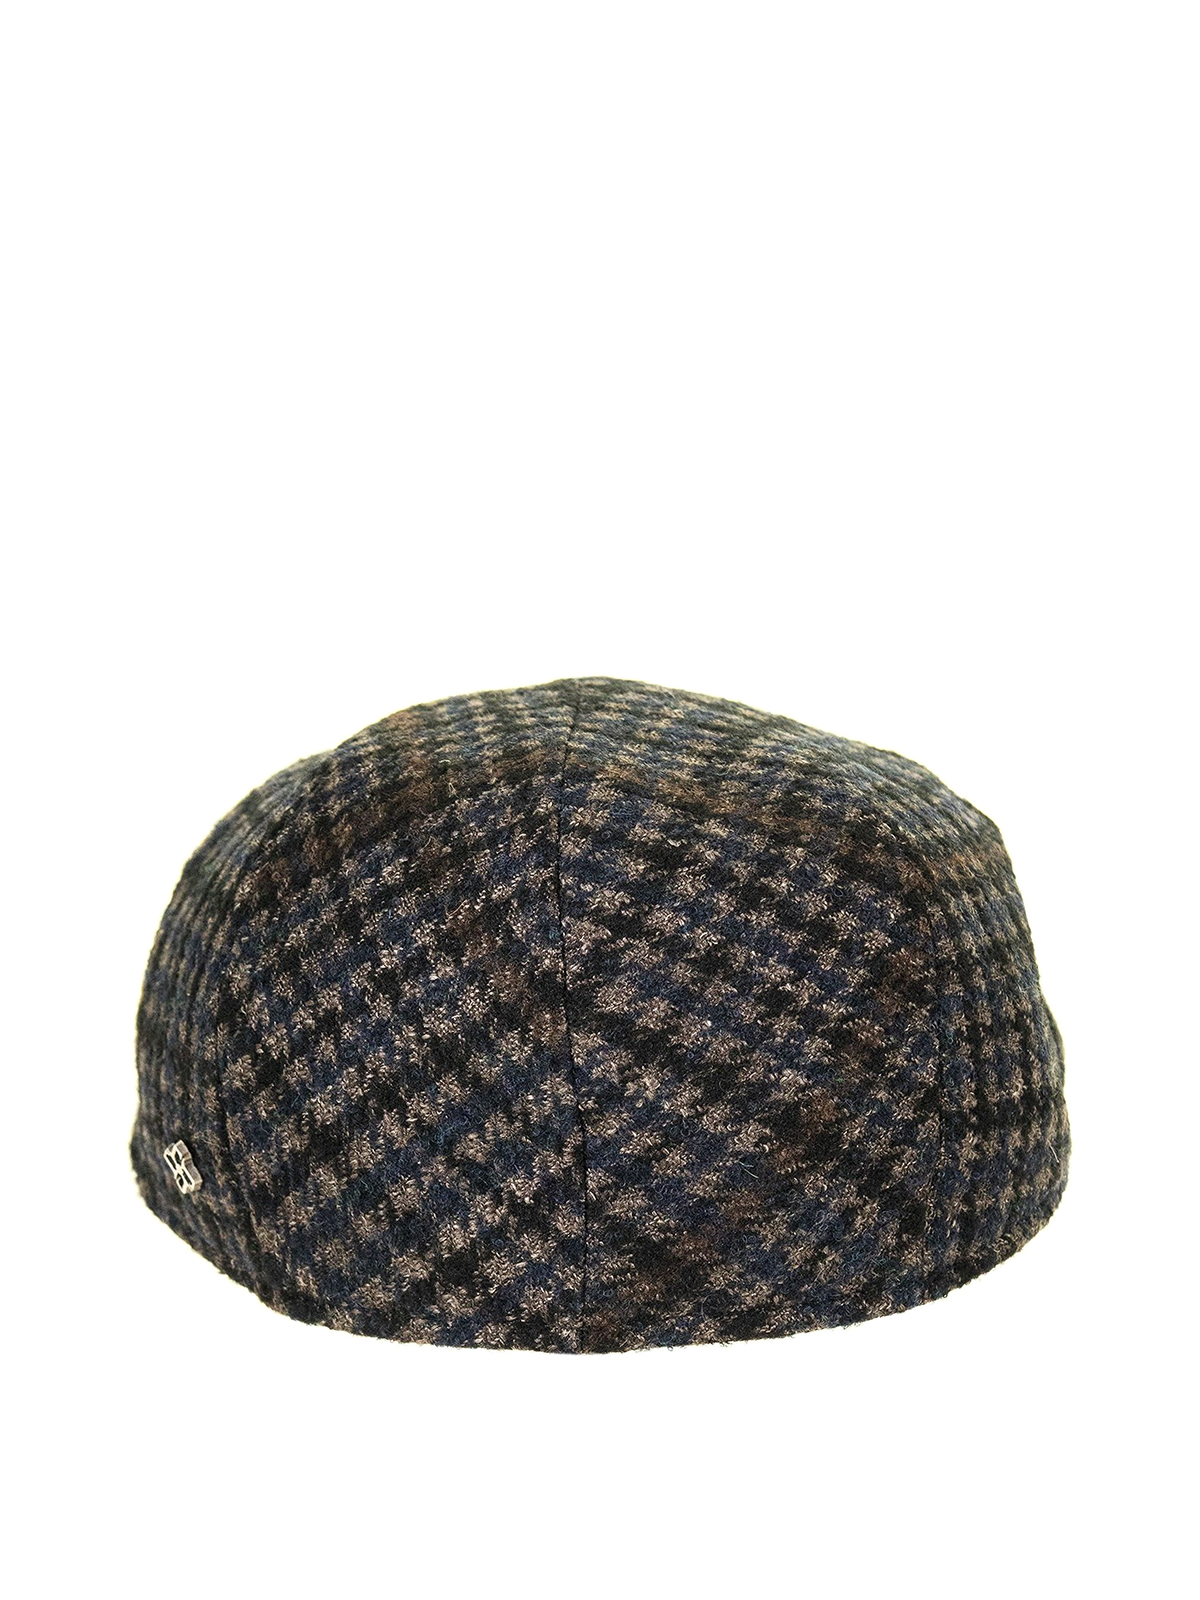 Tagliatore - Houndstooth patterned flat cap - hats & caps ...